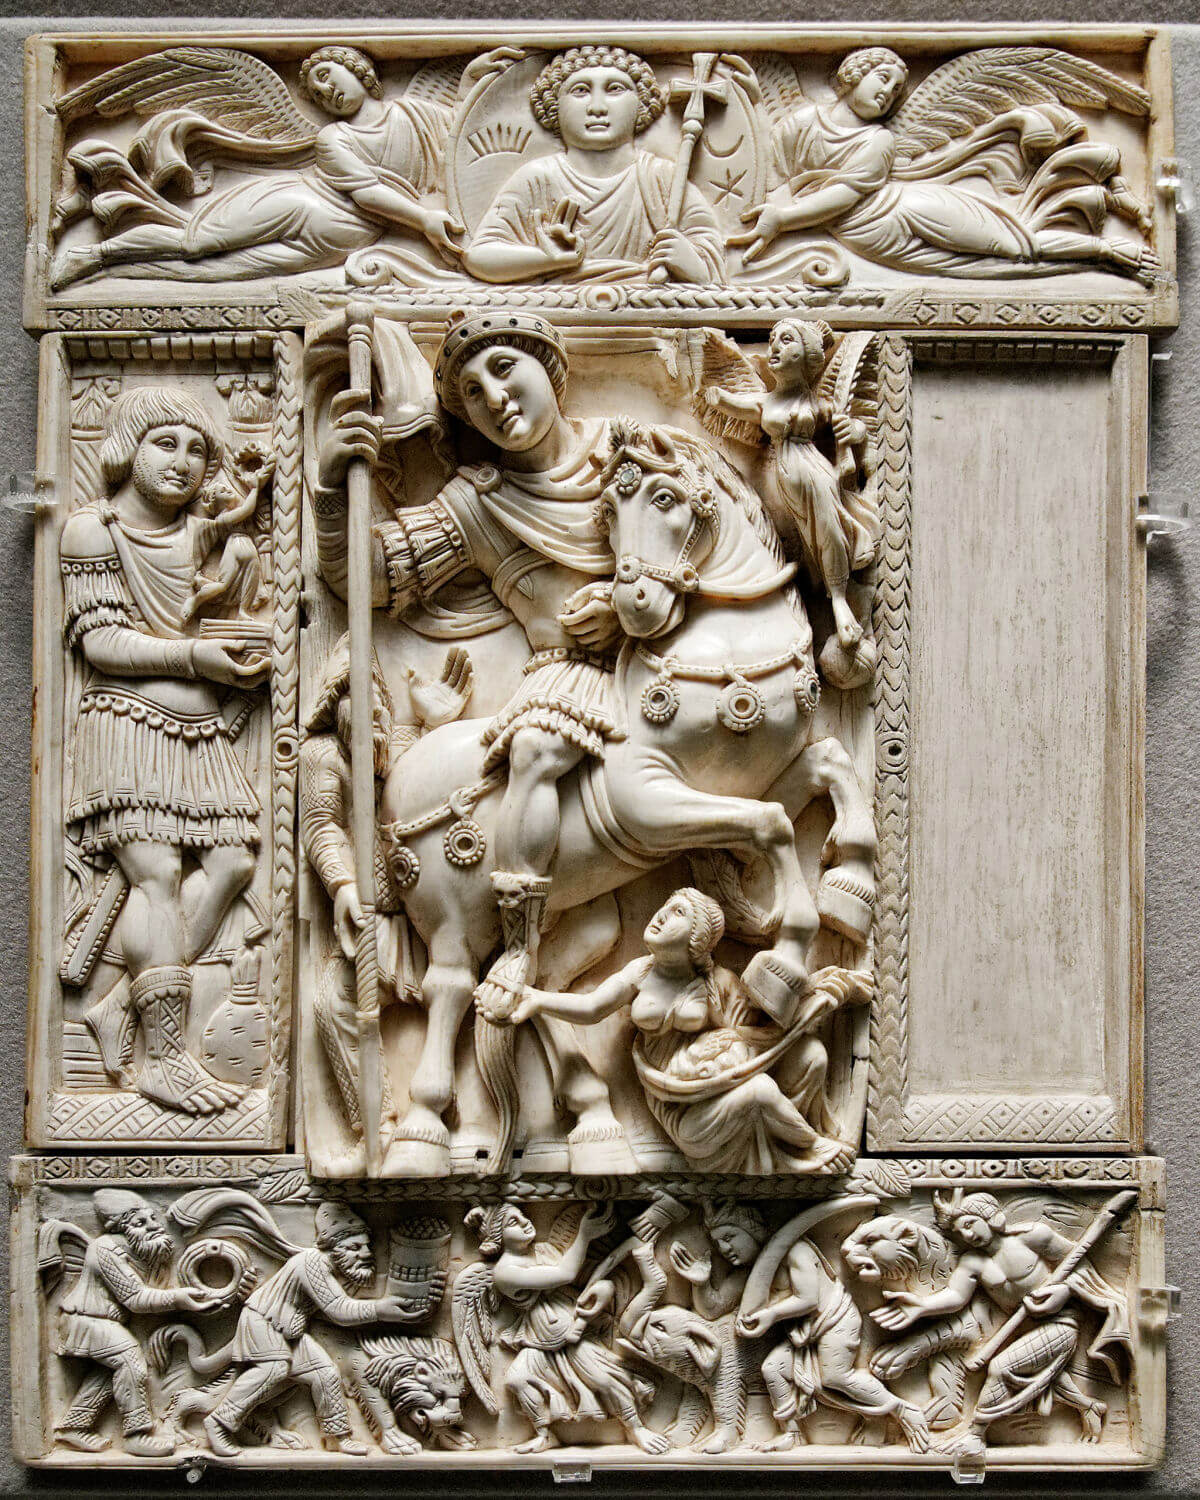 The Barberini ivory diptych, now housed in the Louvre, Paris, France